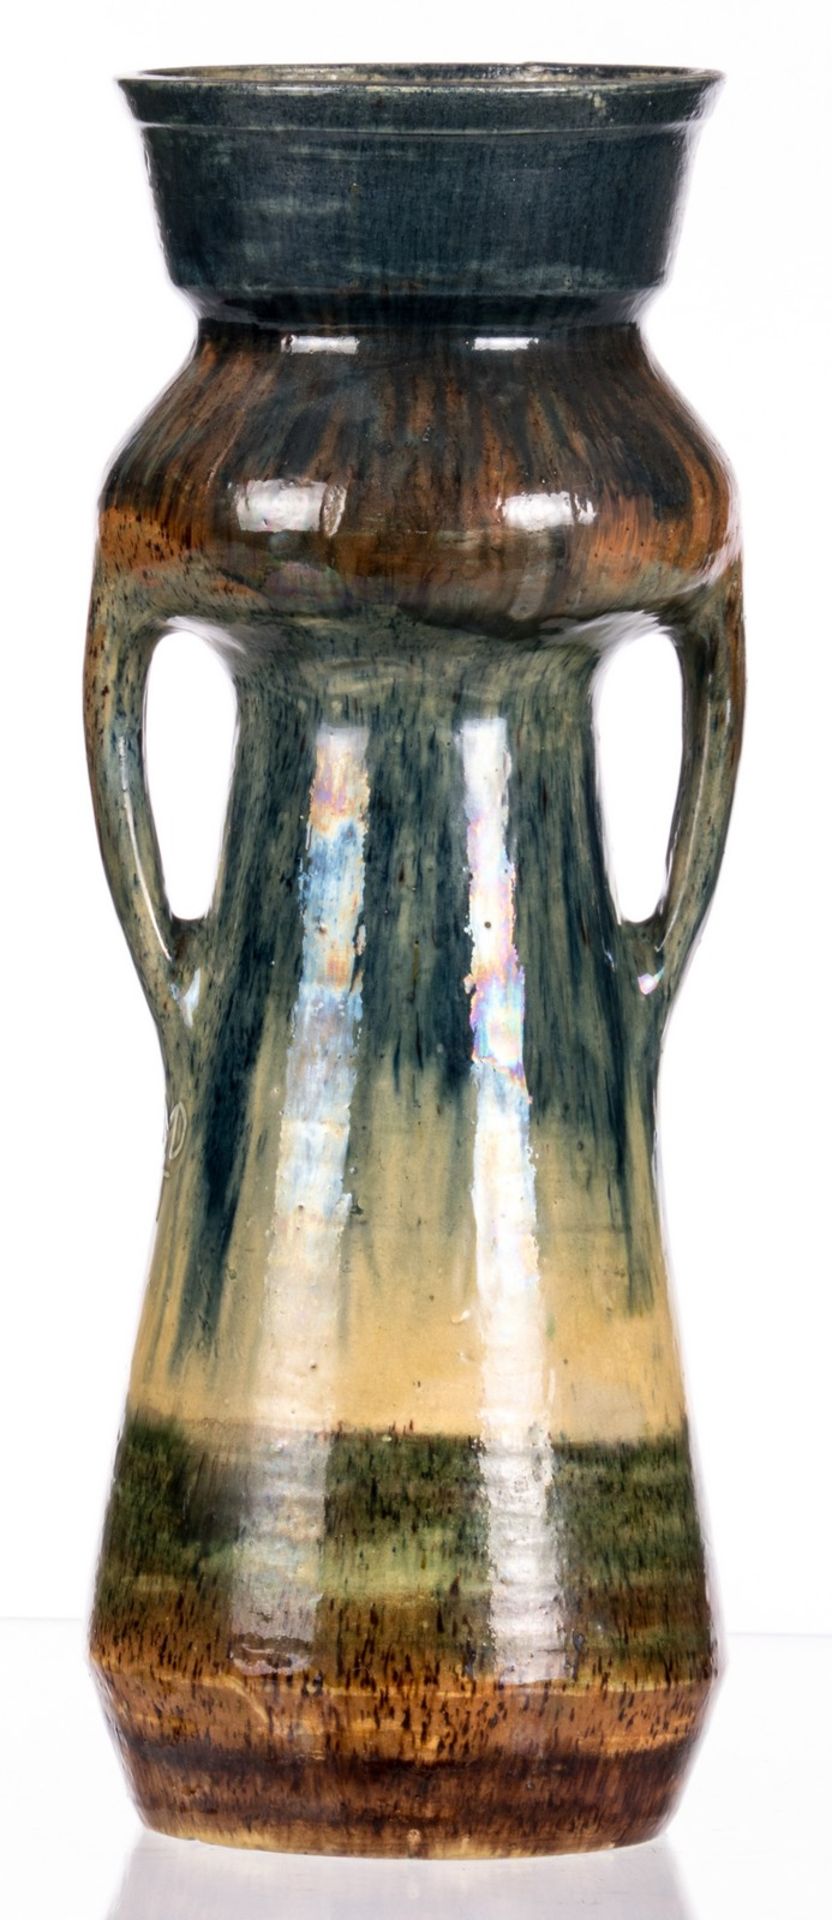 'Wat gij zaait, zult gij oogsten' (What you seed is what you get), a Thourout earthenware vase in - Image 3 of 7